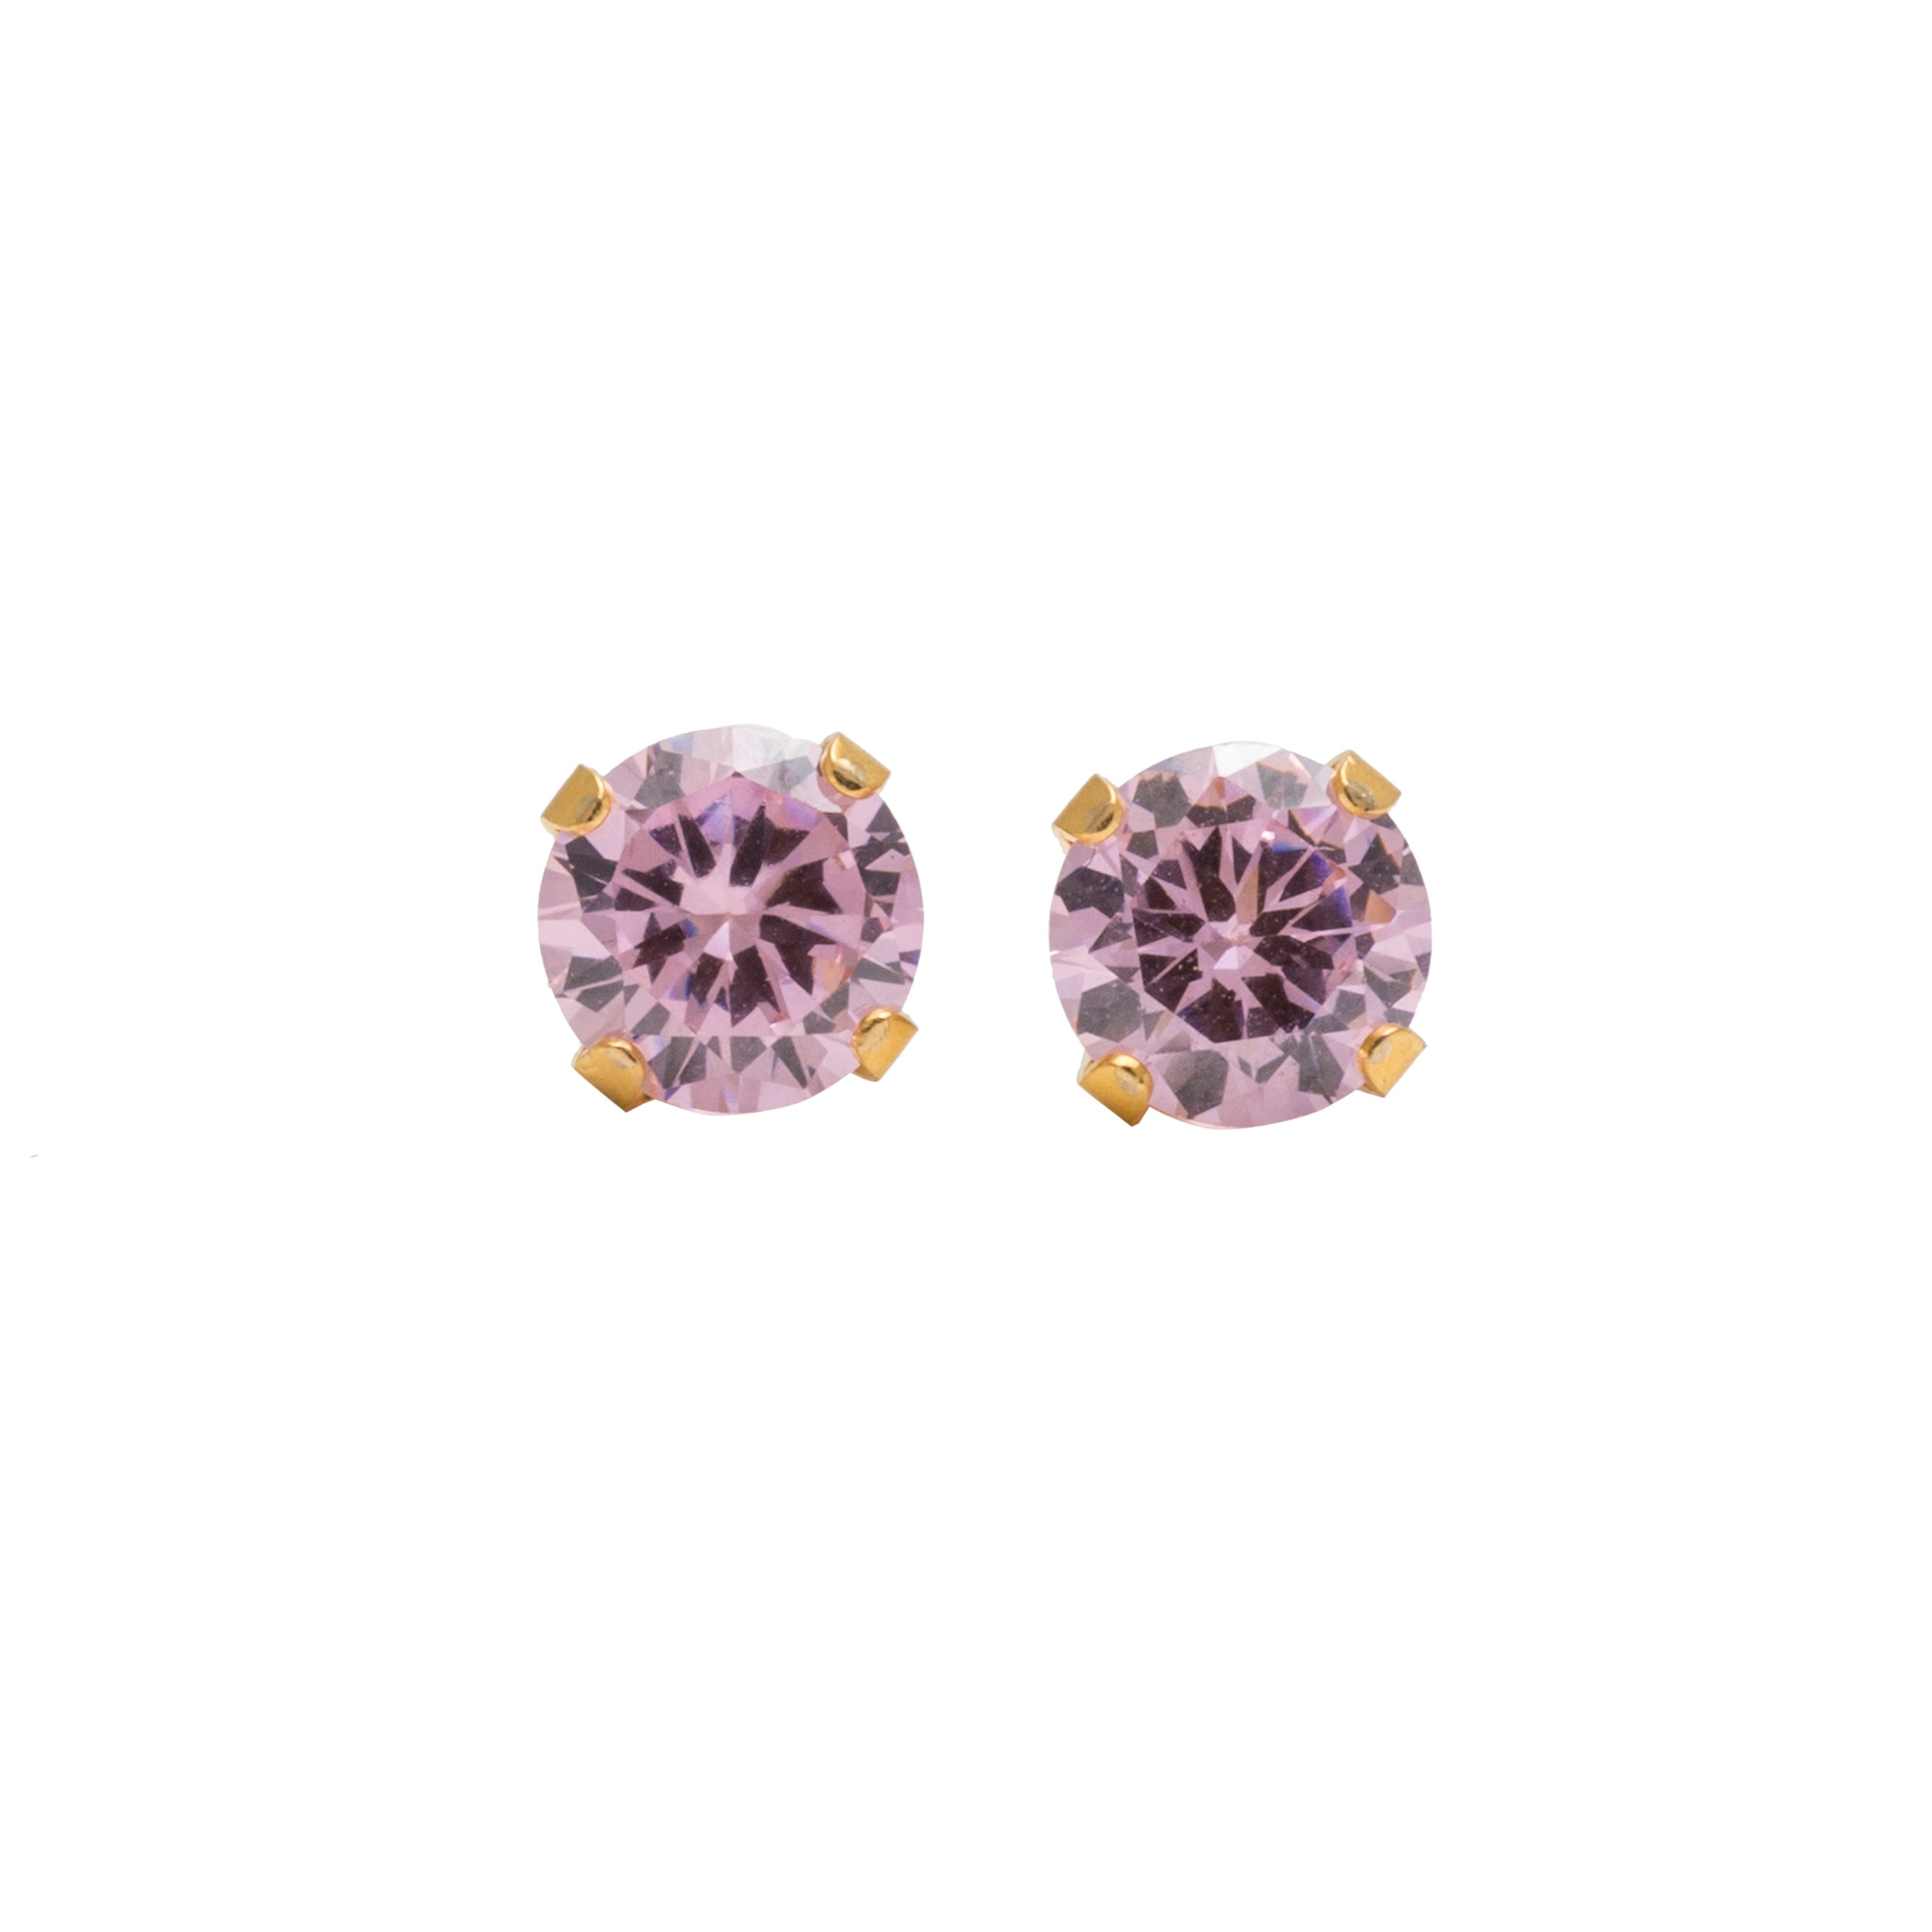 6MM - Cubic Zirconia (Round) - Dark Pink | 24K Gold Plated Simple Yet Stylish, Cute & Trending Fashion Earrings / Ear Studs for Girls & Women Online @ Pakistan | Studex Sensitive (for daily wear)